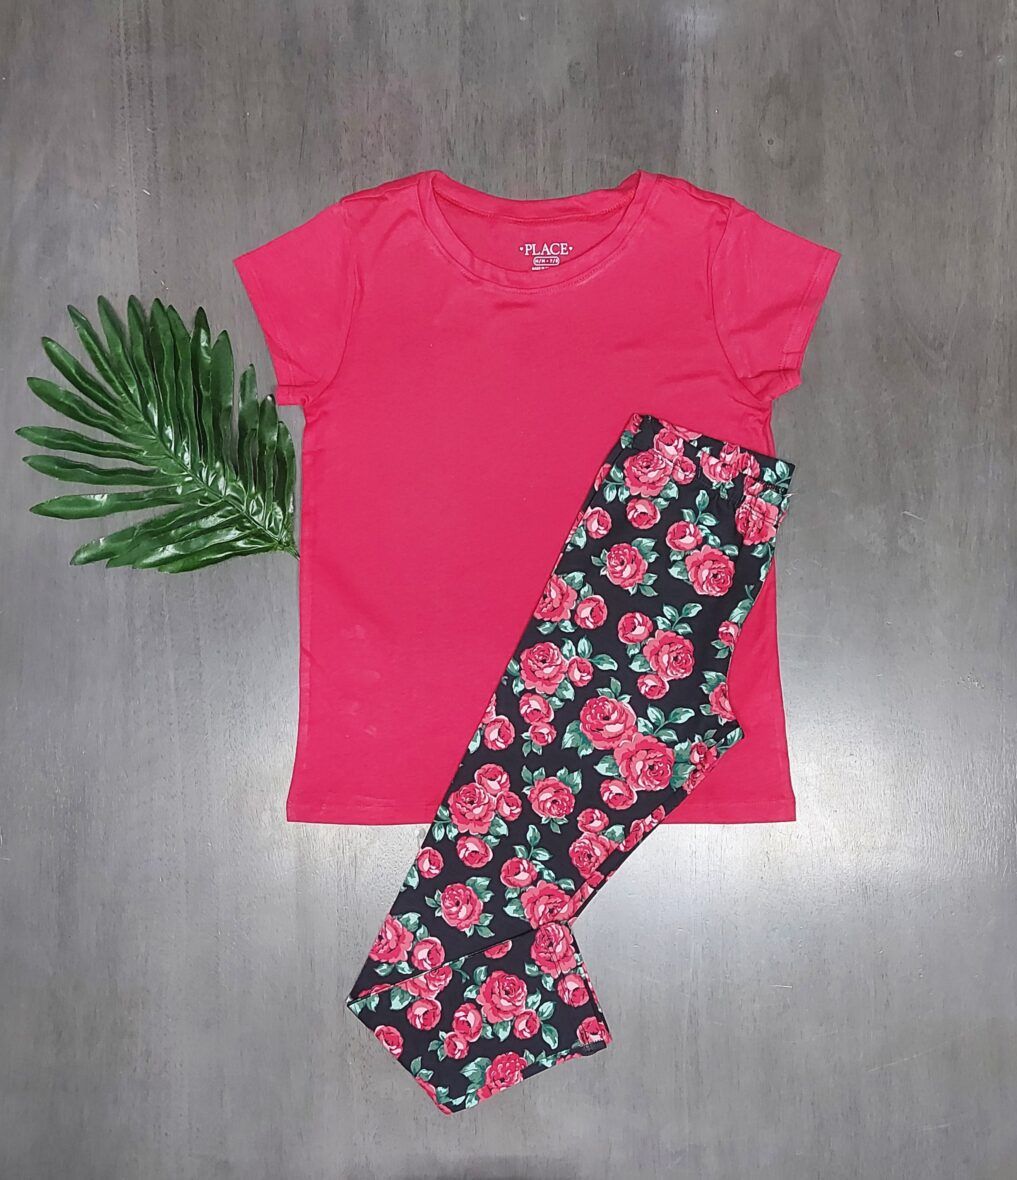 Children’s Place Red Top & Red Floral Leggings 2 – Piece